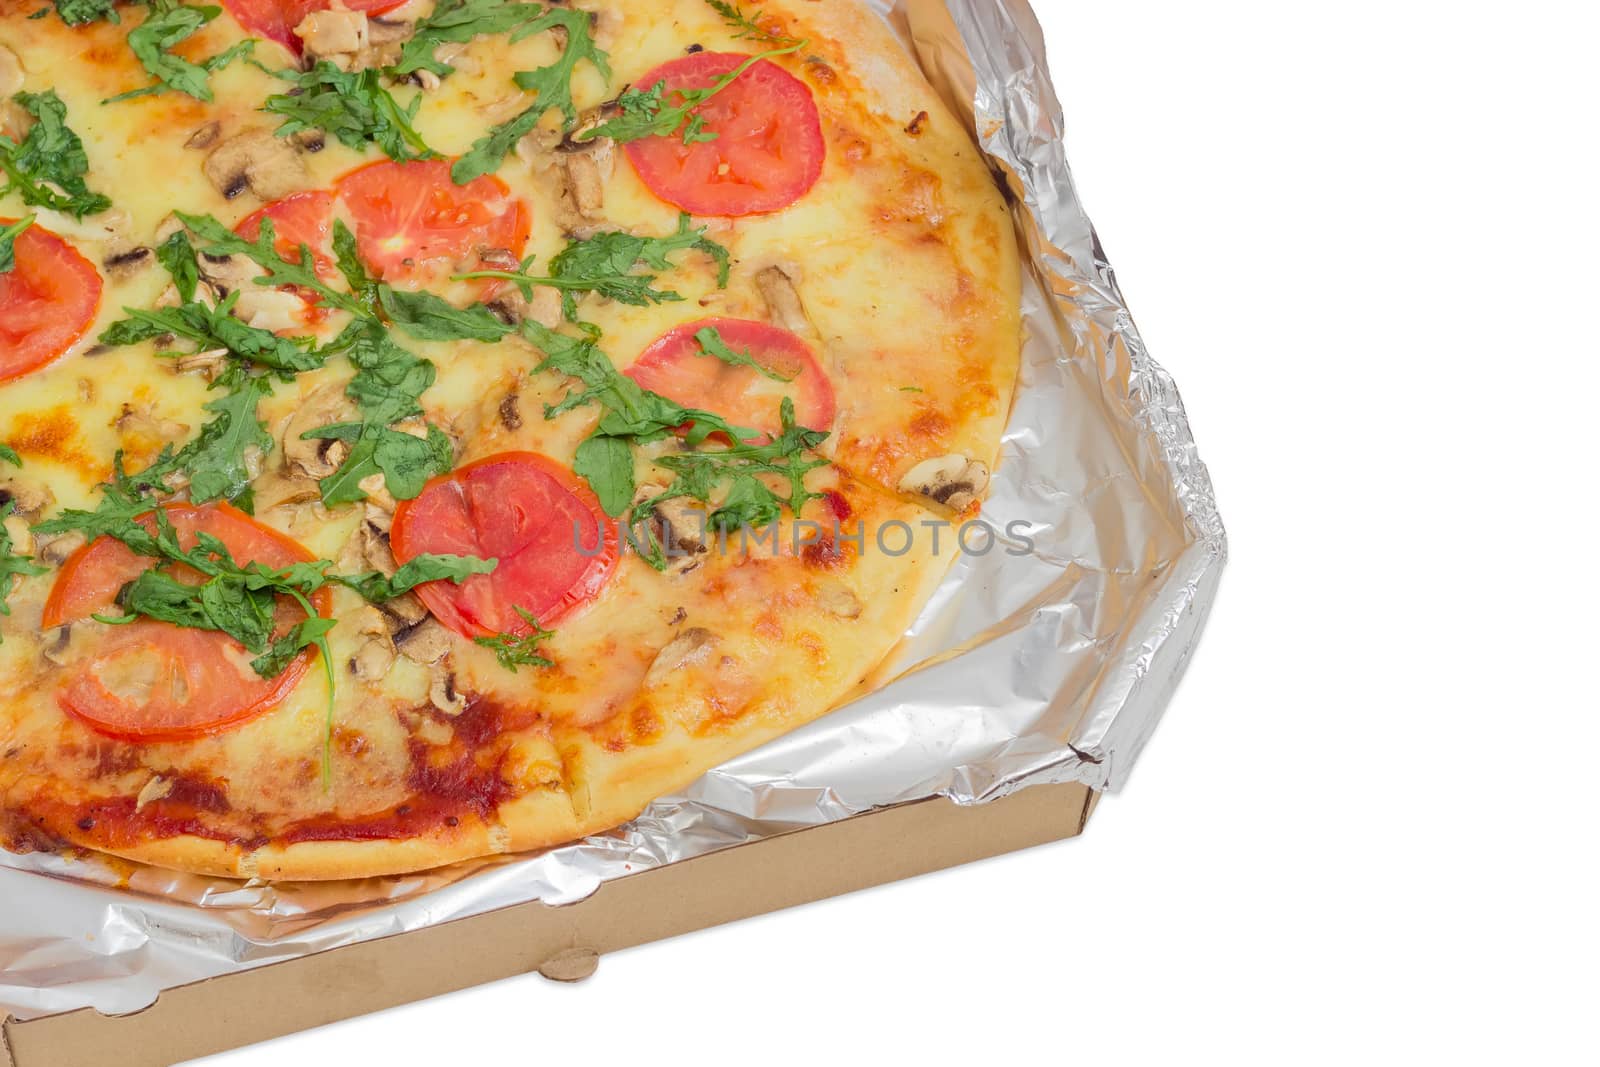 Fragment of the cooked round pizza with tomatoes, mushrooms and arugula wrapped in aluminum foil in the open cardboard box on a light background
